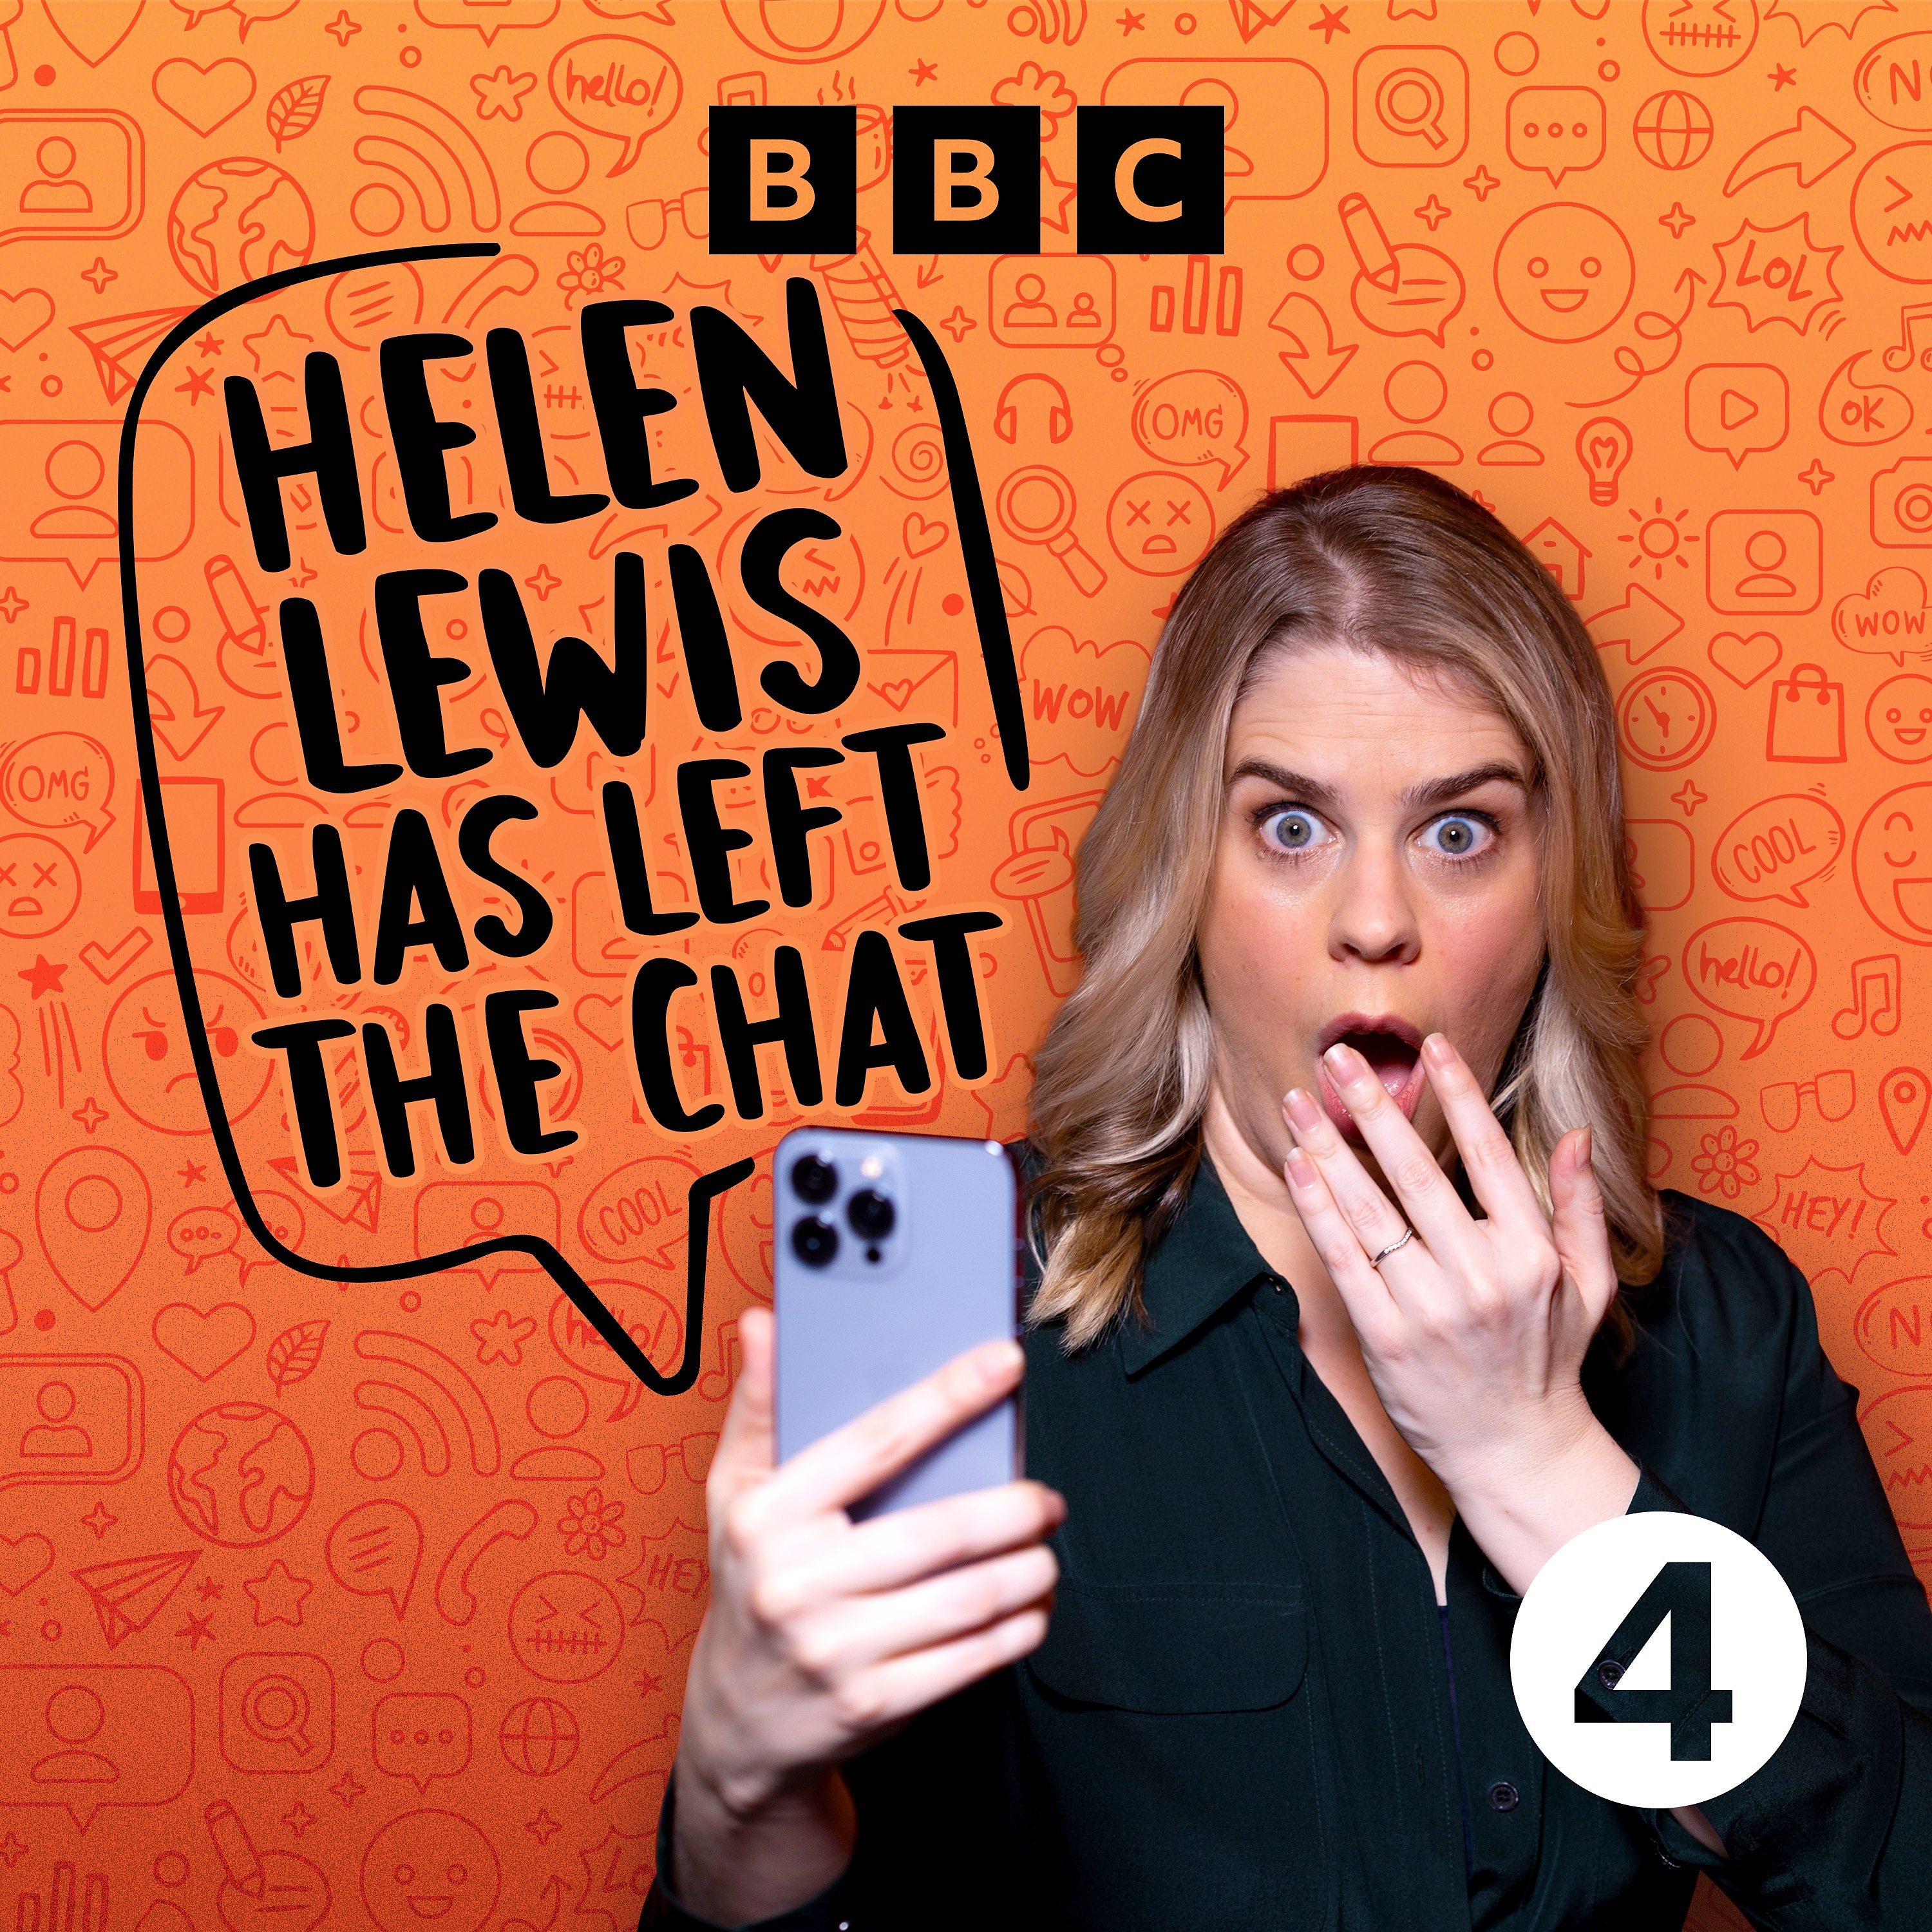 Introducing Helen Lewis Has Left the Chat